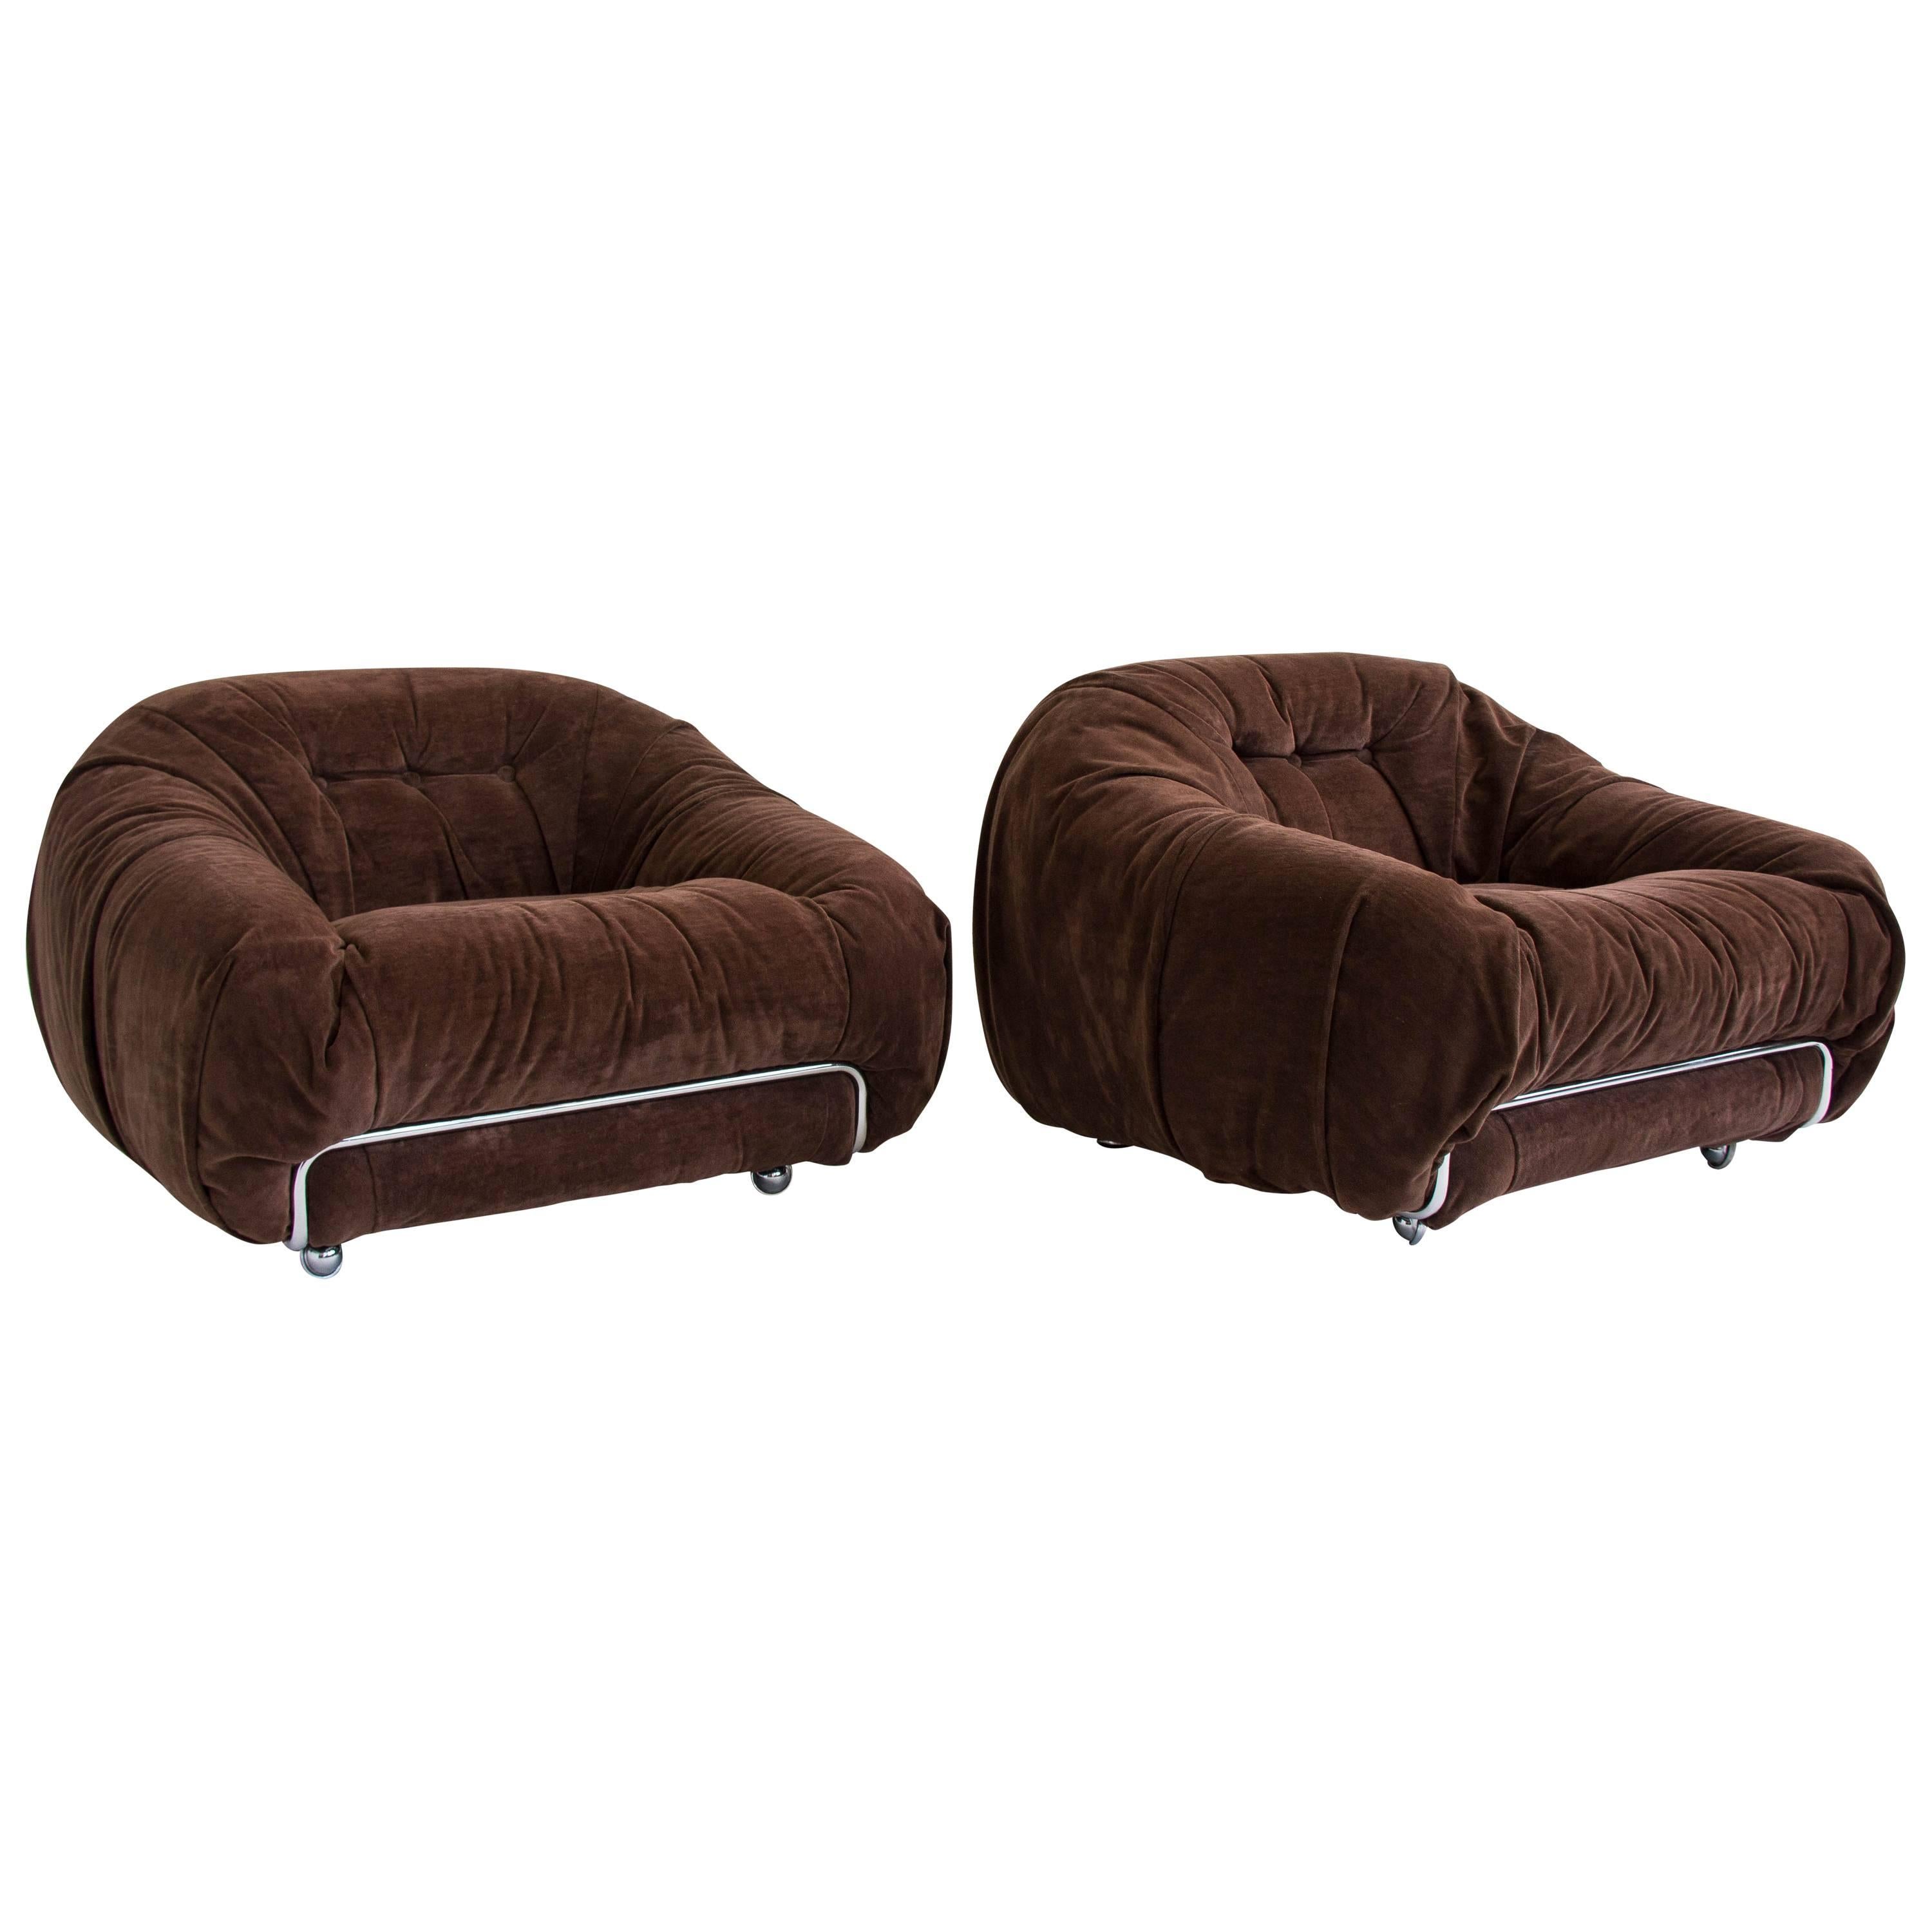 Pair of American Made Lounge Chairs by Burris